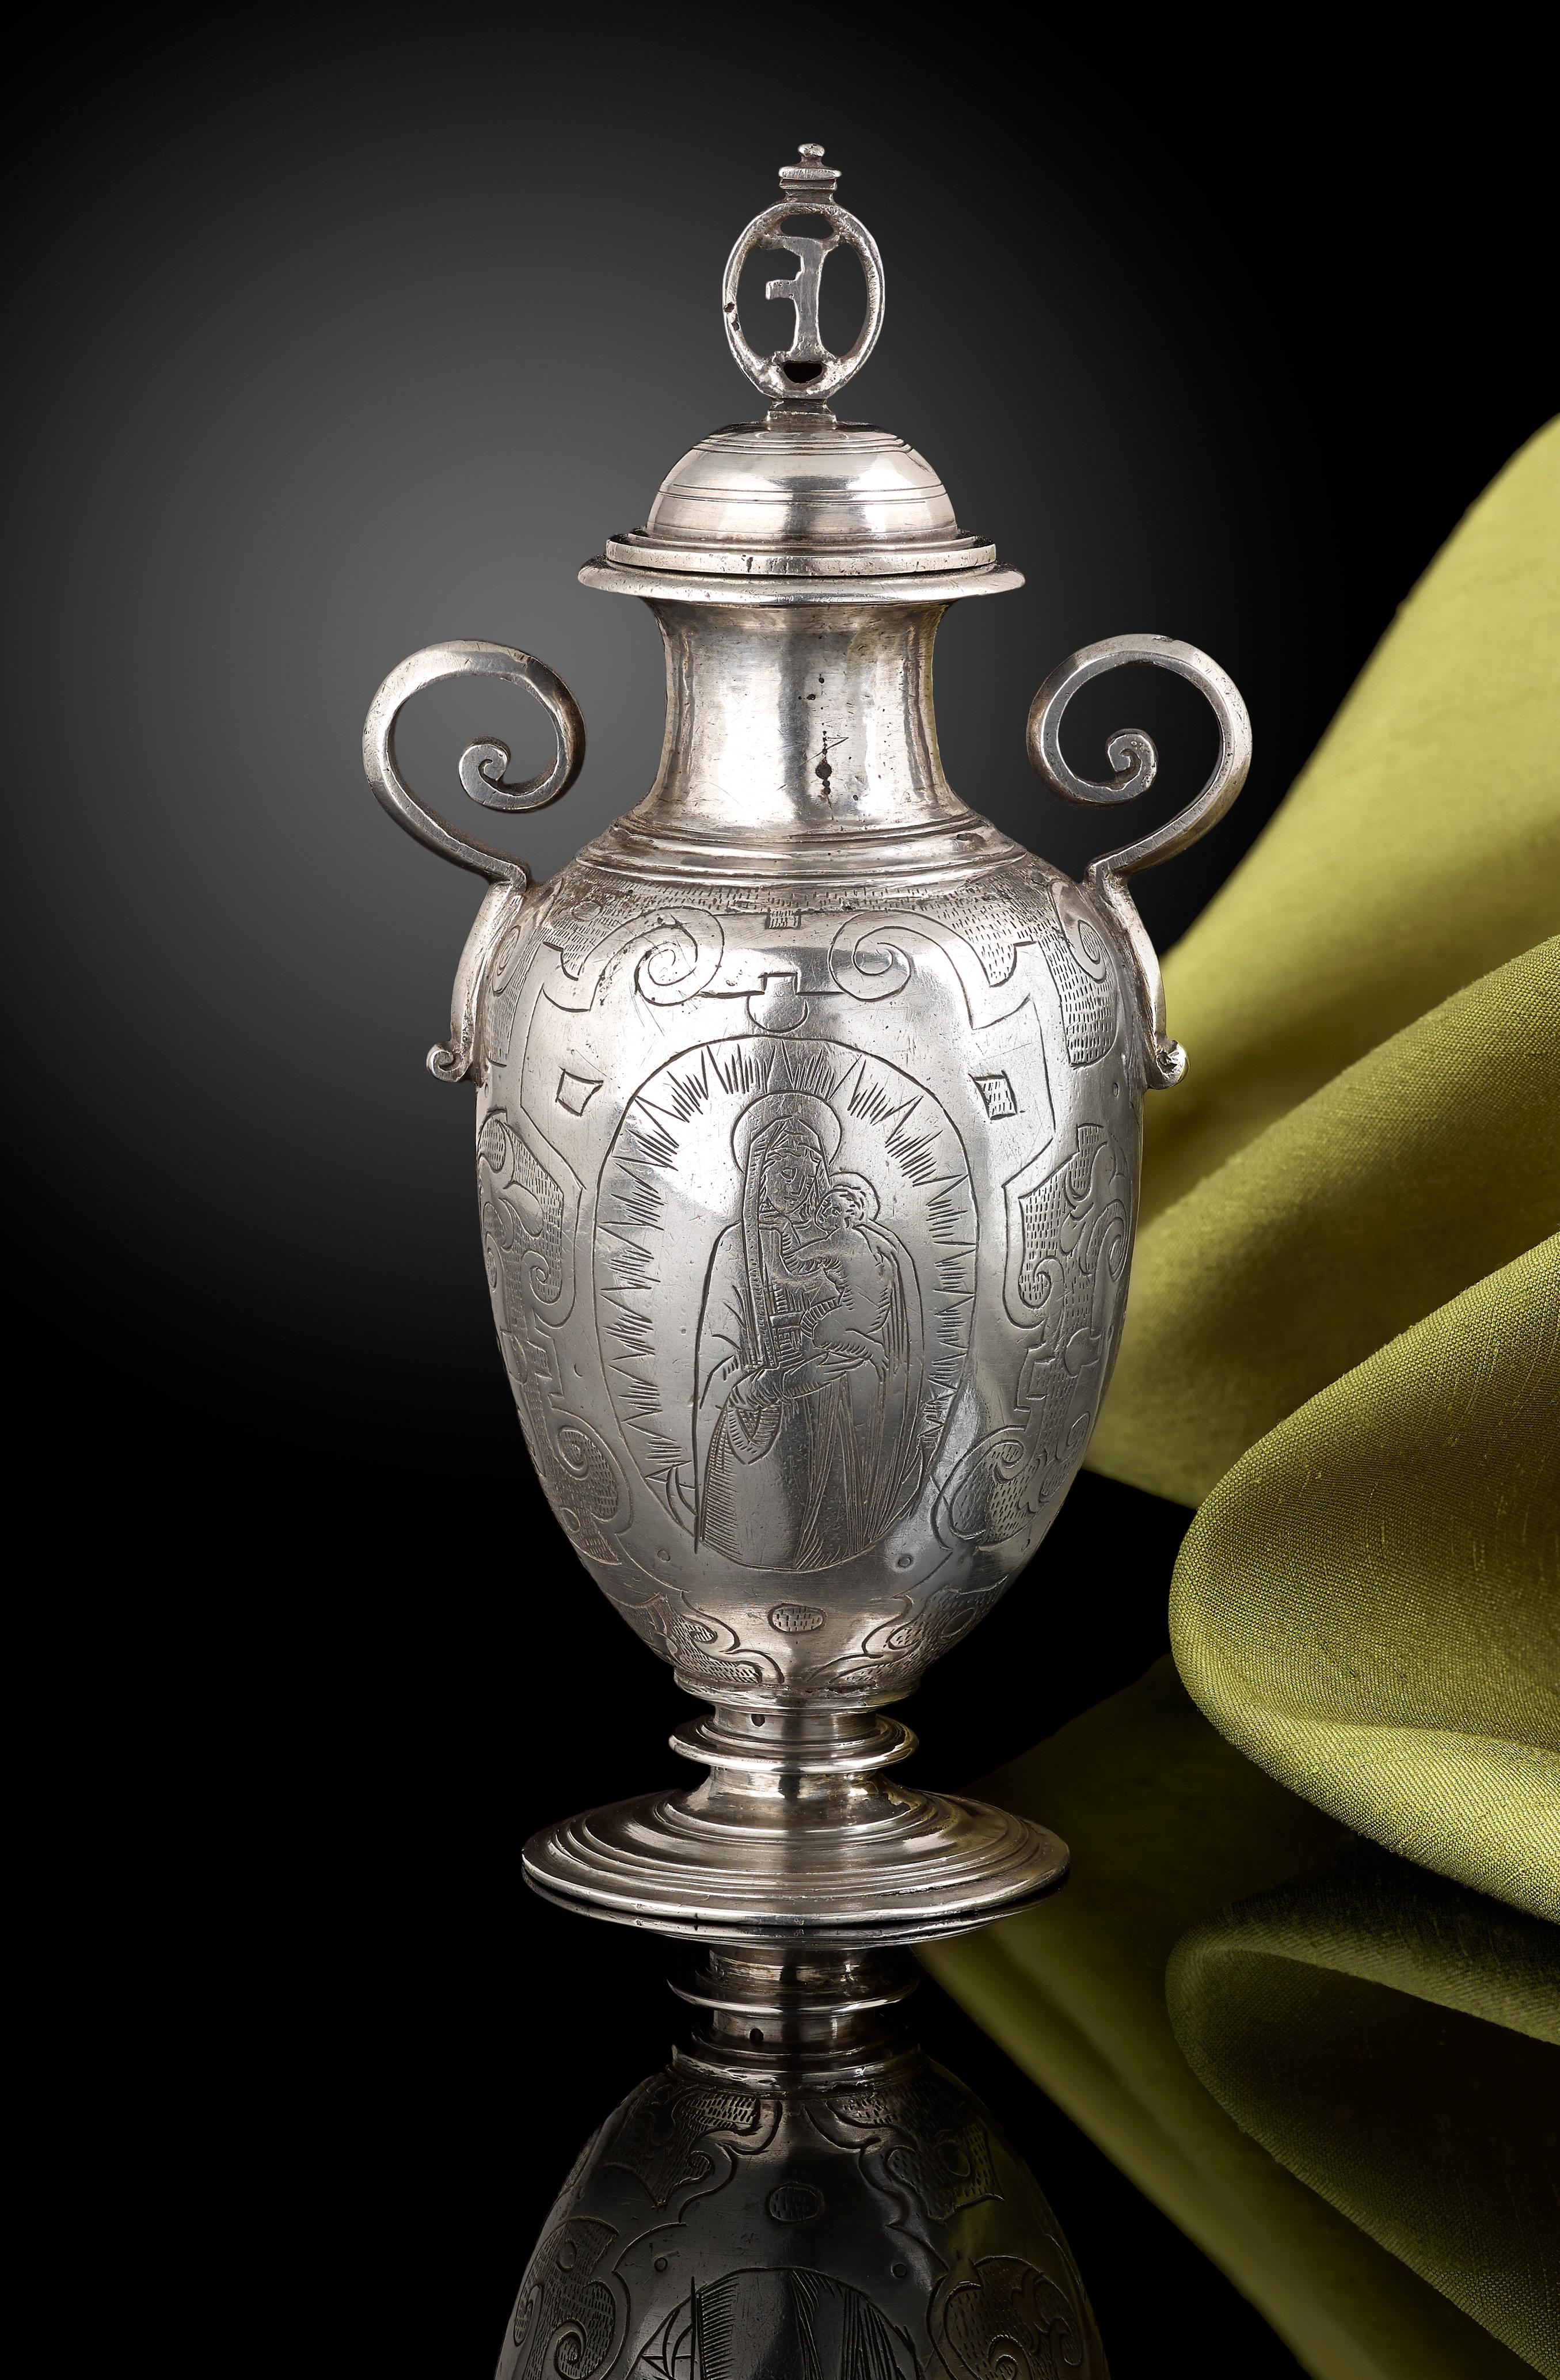 A rare silver altar bottle for holy oil, Spanish, circa 1620, interlocking decoration and two biblical scenes engraved on the sides of the bottle, approximate height to the top of the finial is 5 ½ inches and weighing 6 ozs approximate.